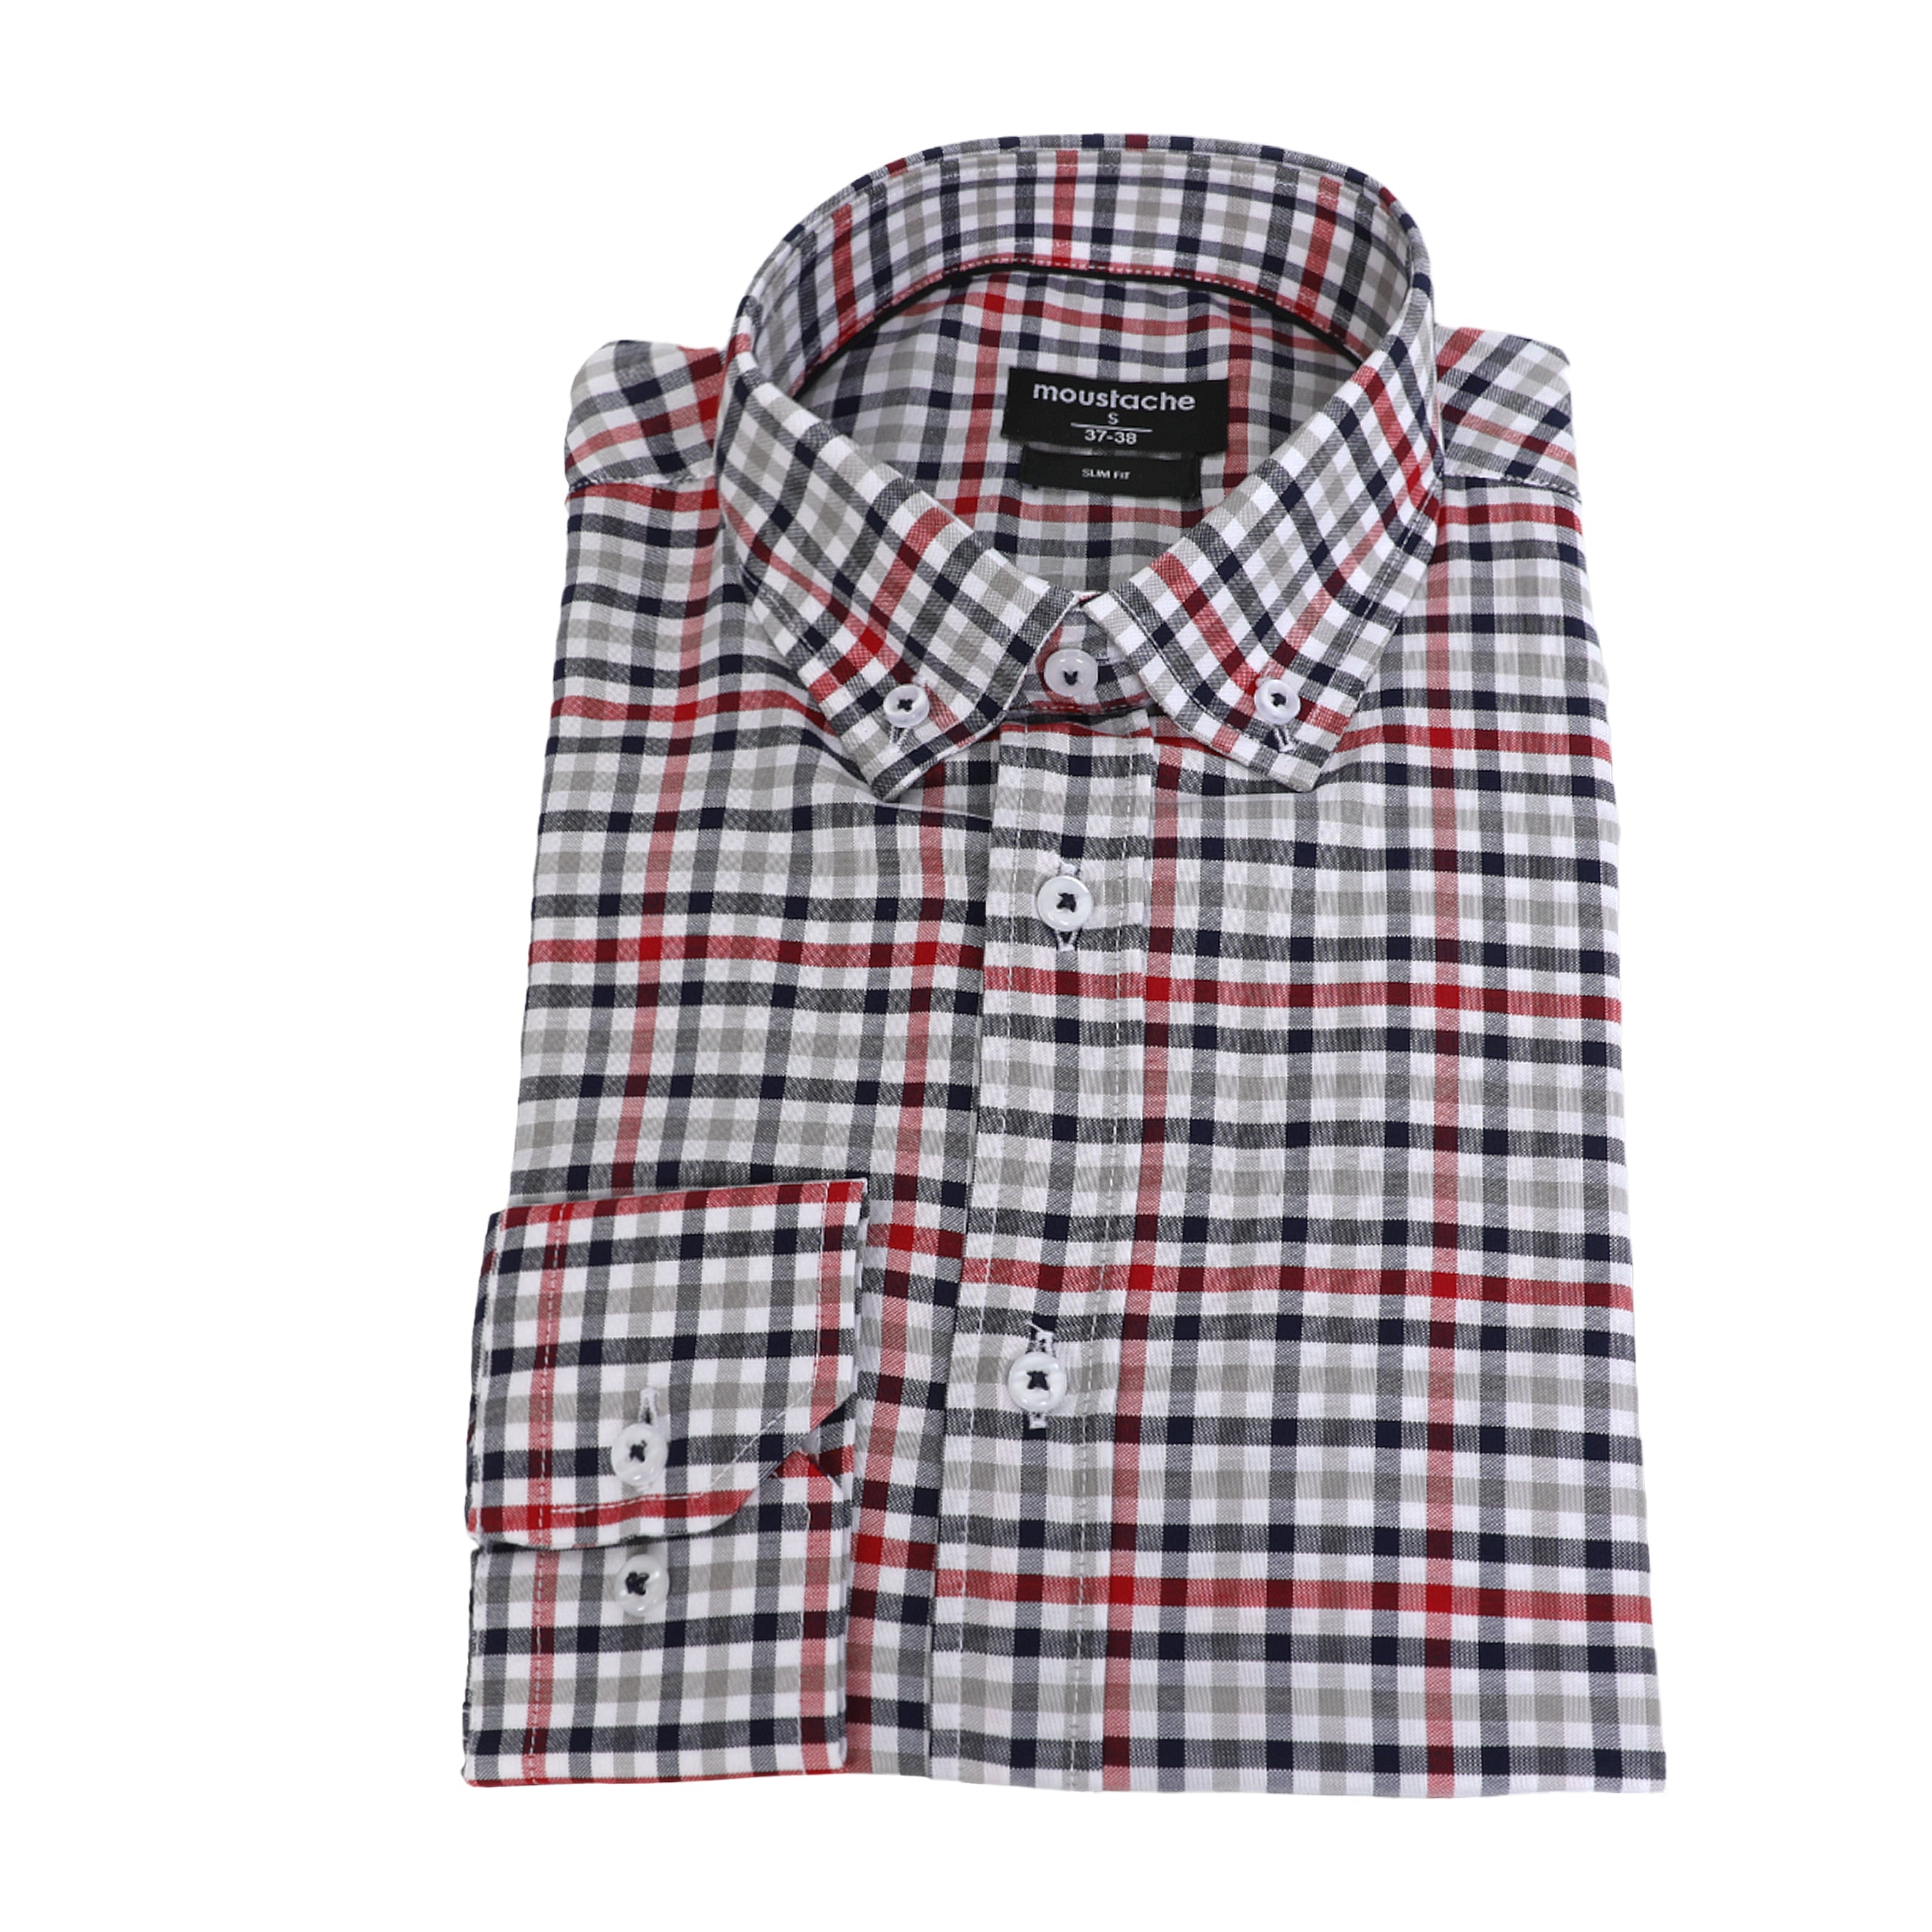 Moustache's Slim Fit Red Patterned Casual Shirt